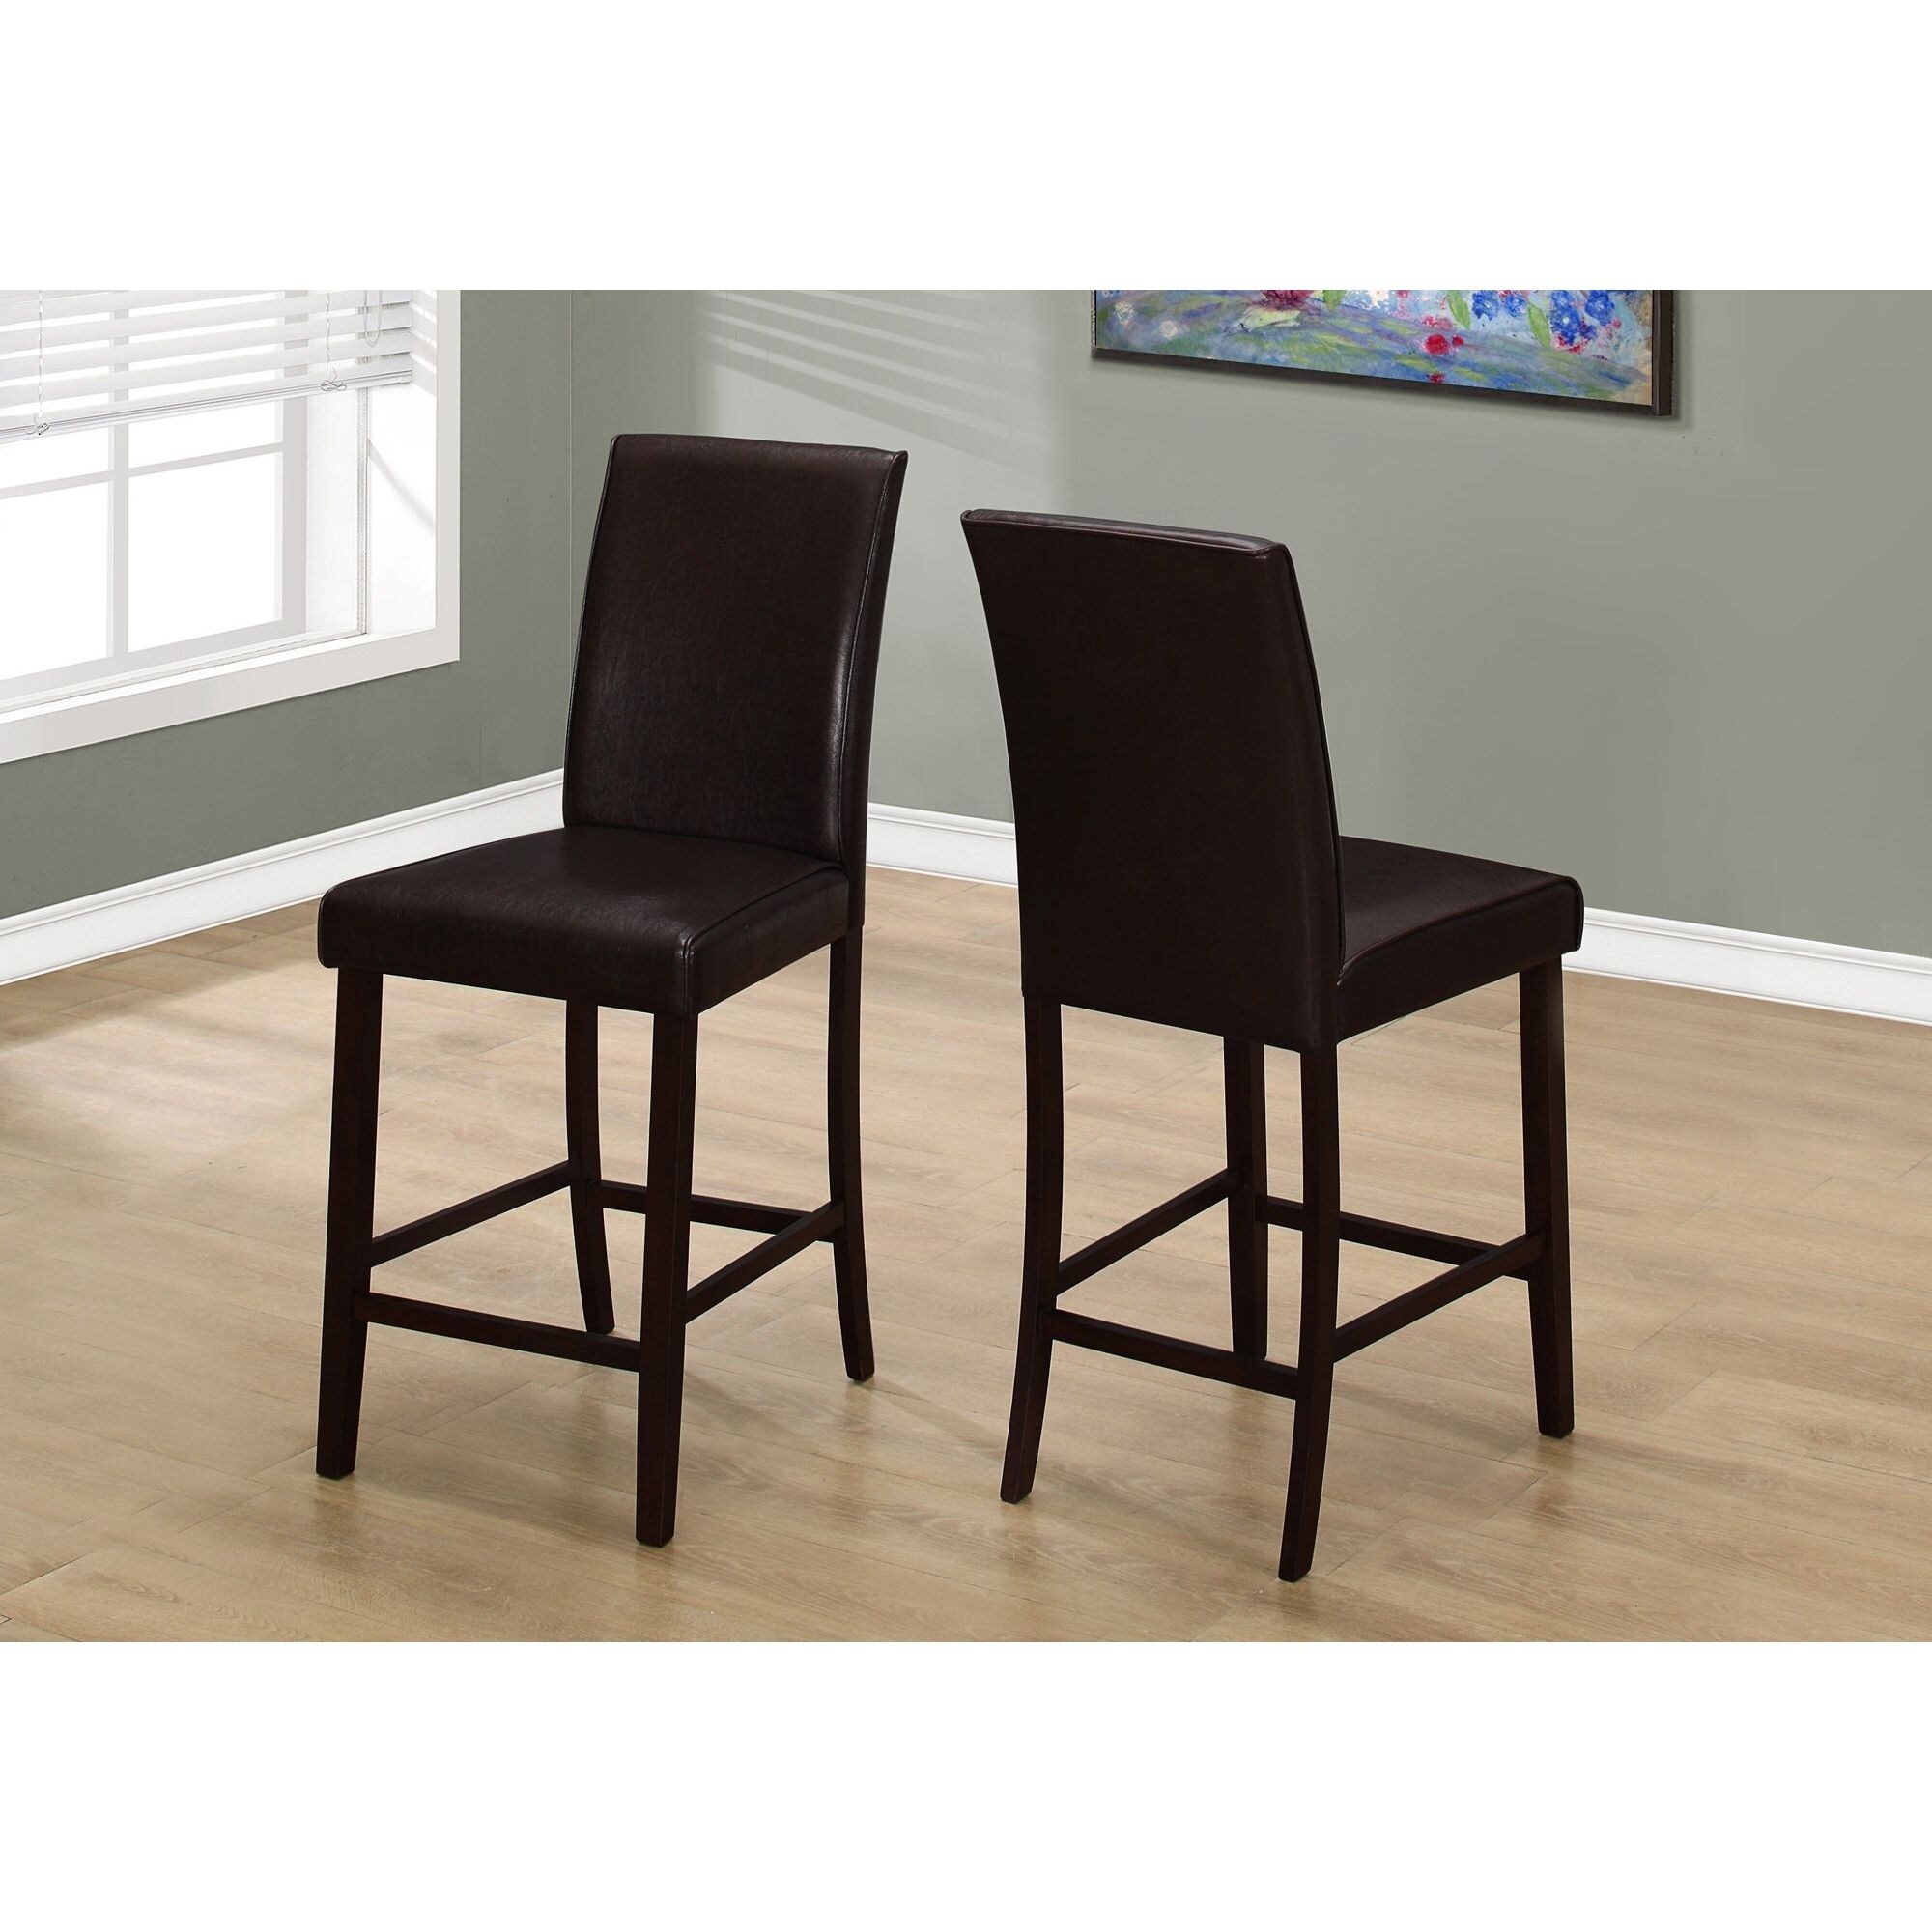 Set of 2 Brown Leather Look Contemporary Dining Chairs 40''